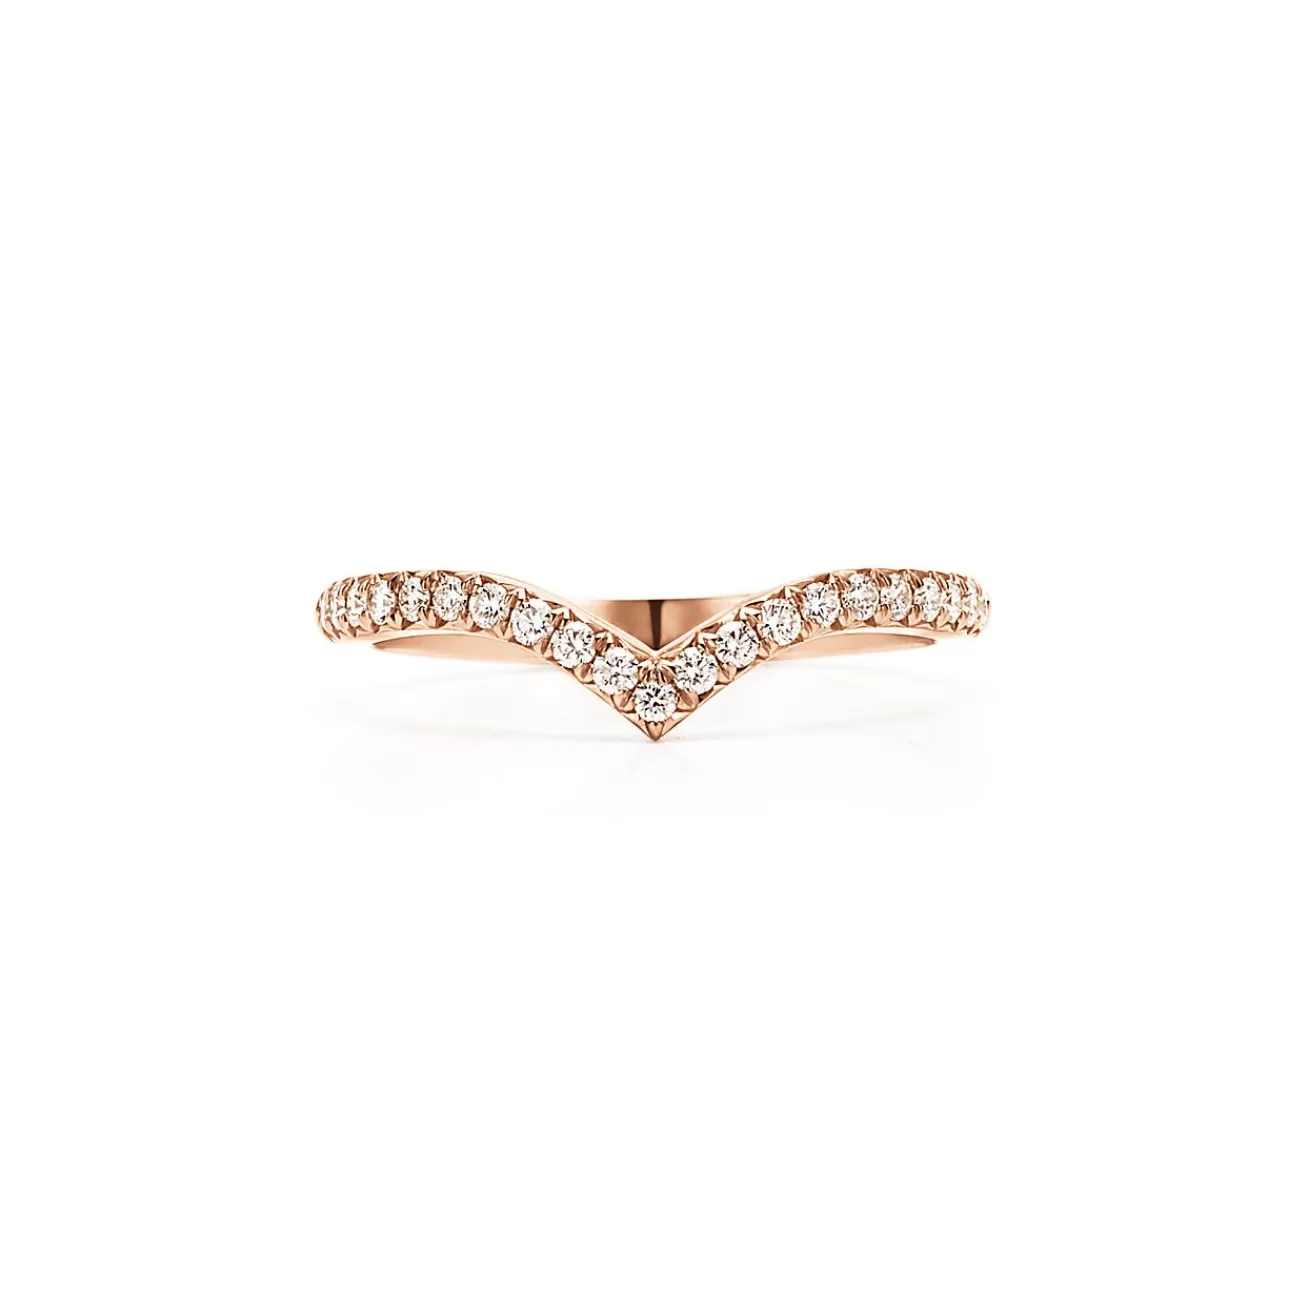 Tiffany & Co. Tiffany Soleste V ring in 18k rose gold with diamonds. | ^Women Rings | Gifts for Her